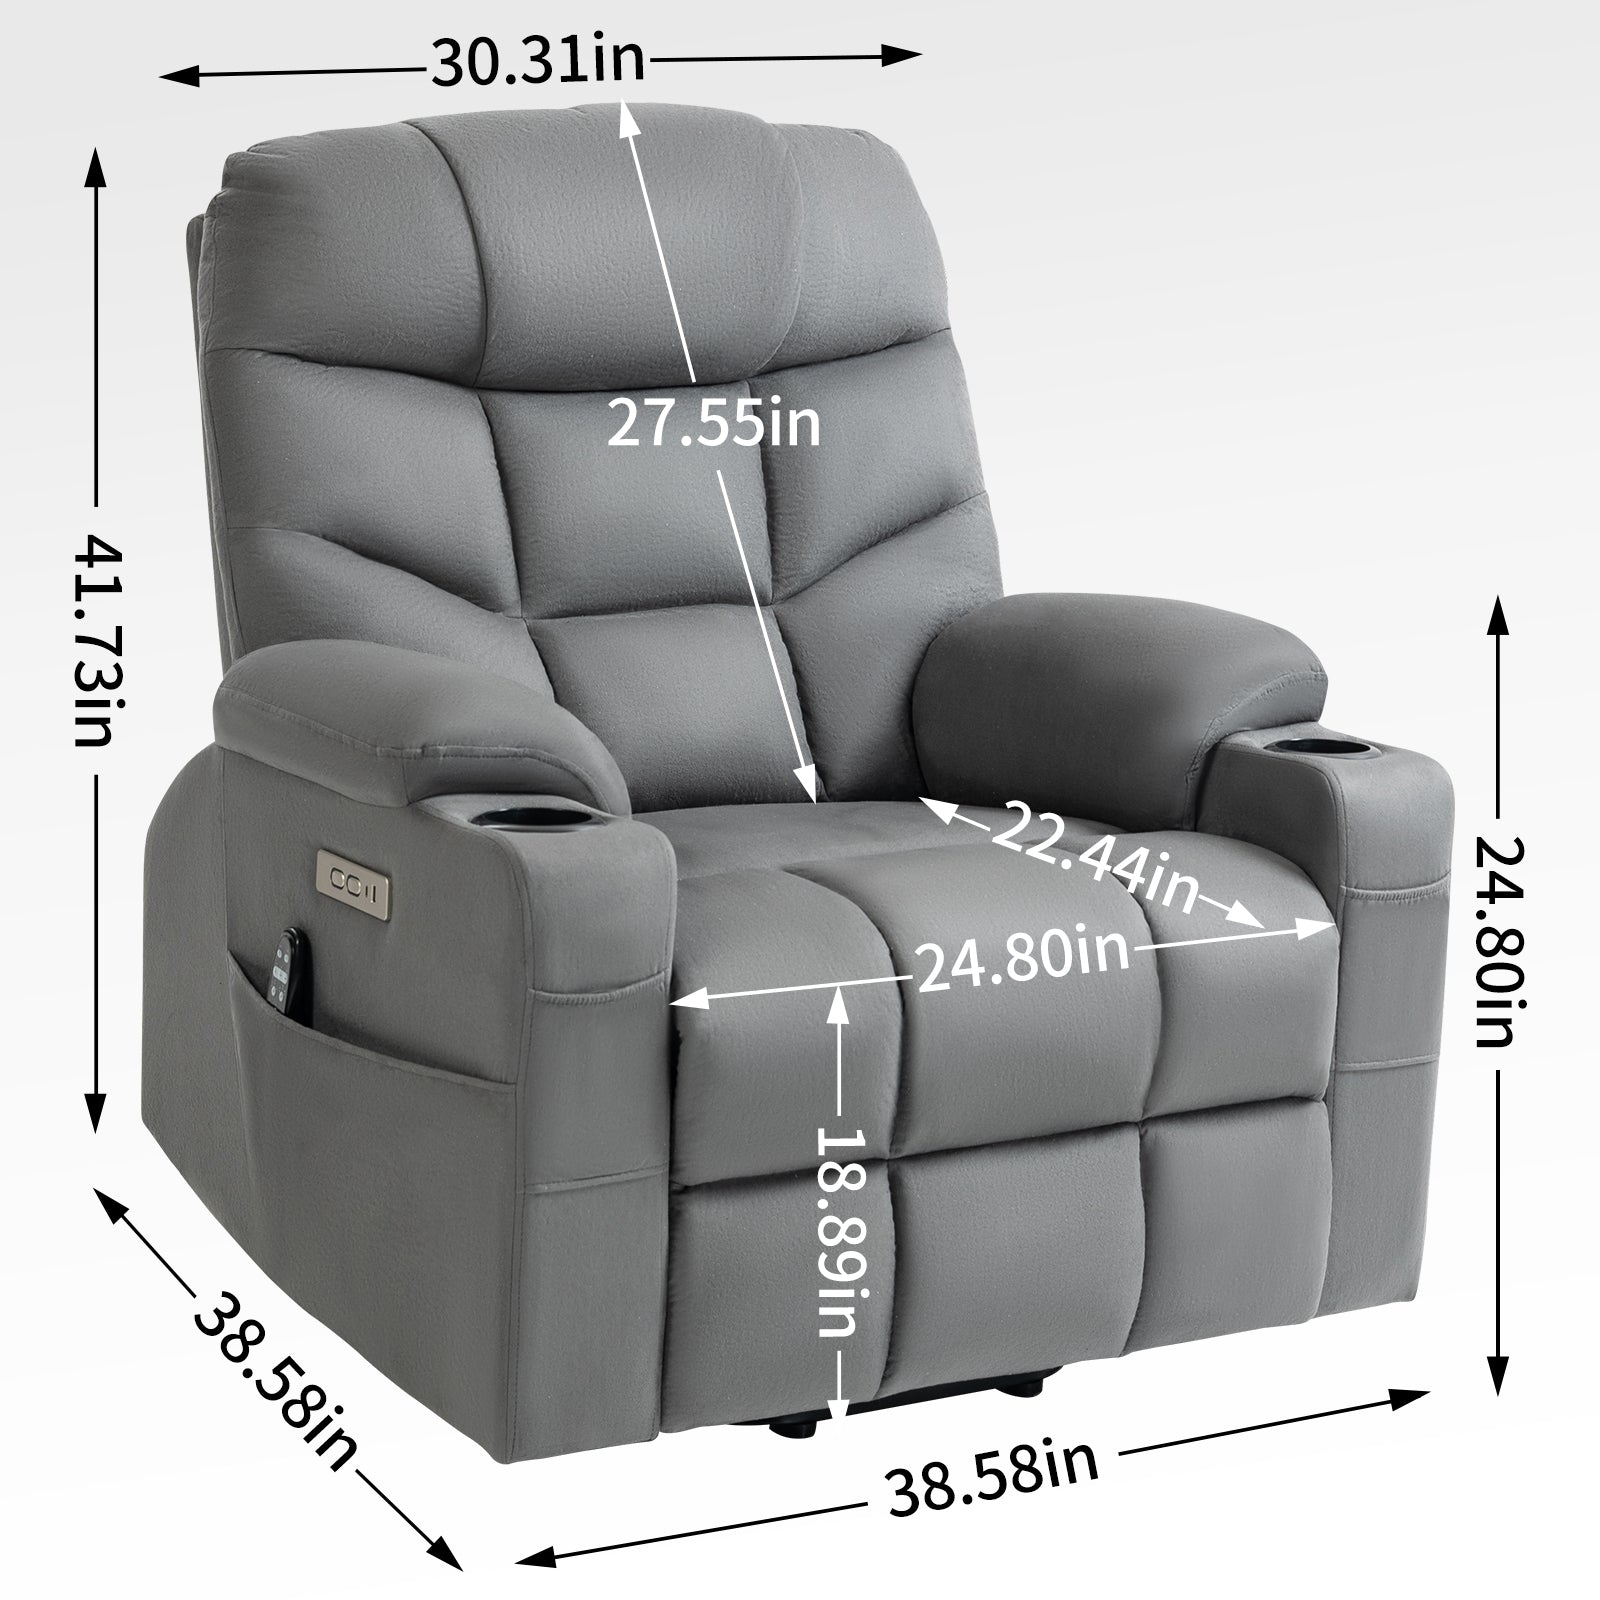 Grey Power Lift Recliner Chair with Vibration Massage and Lumbar Heat, measurements